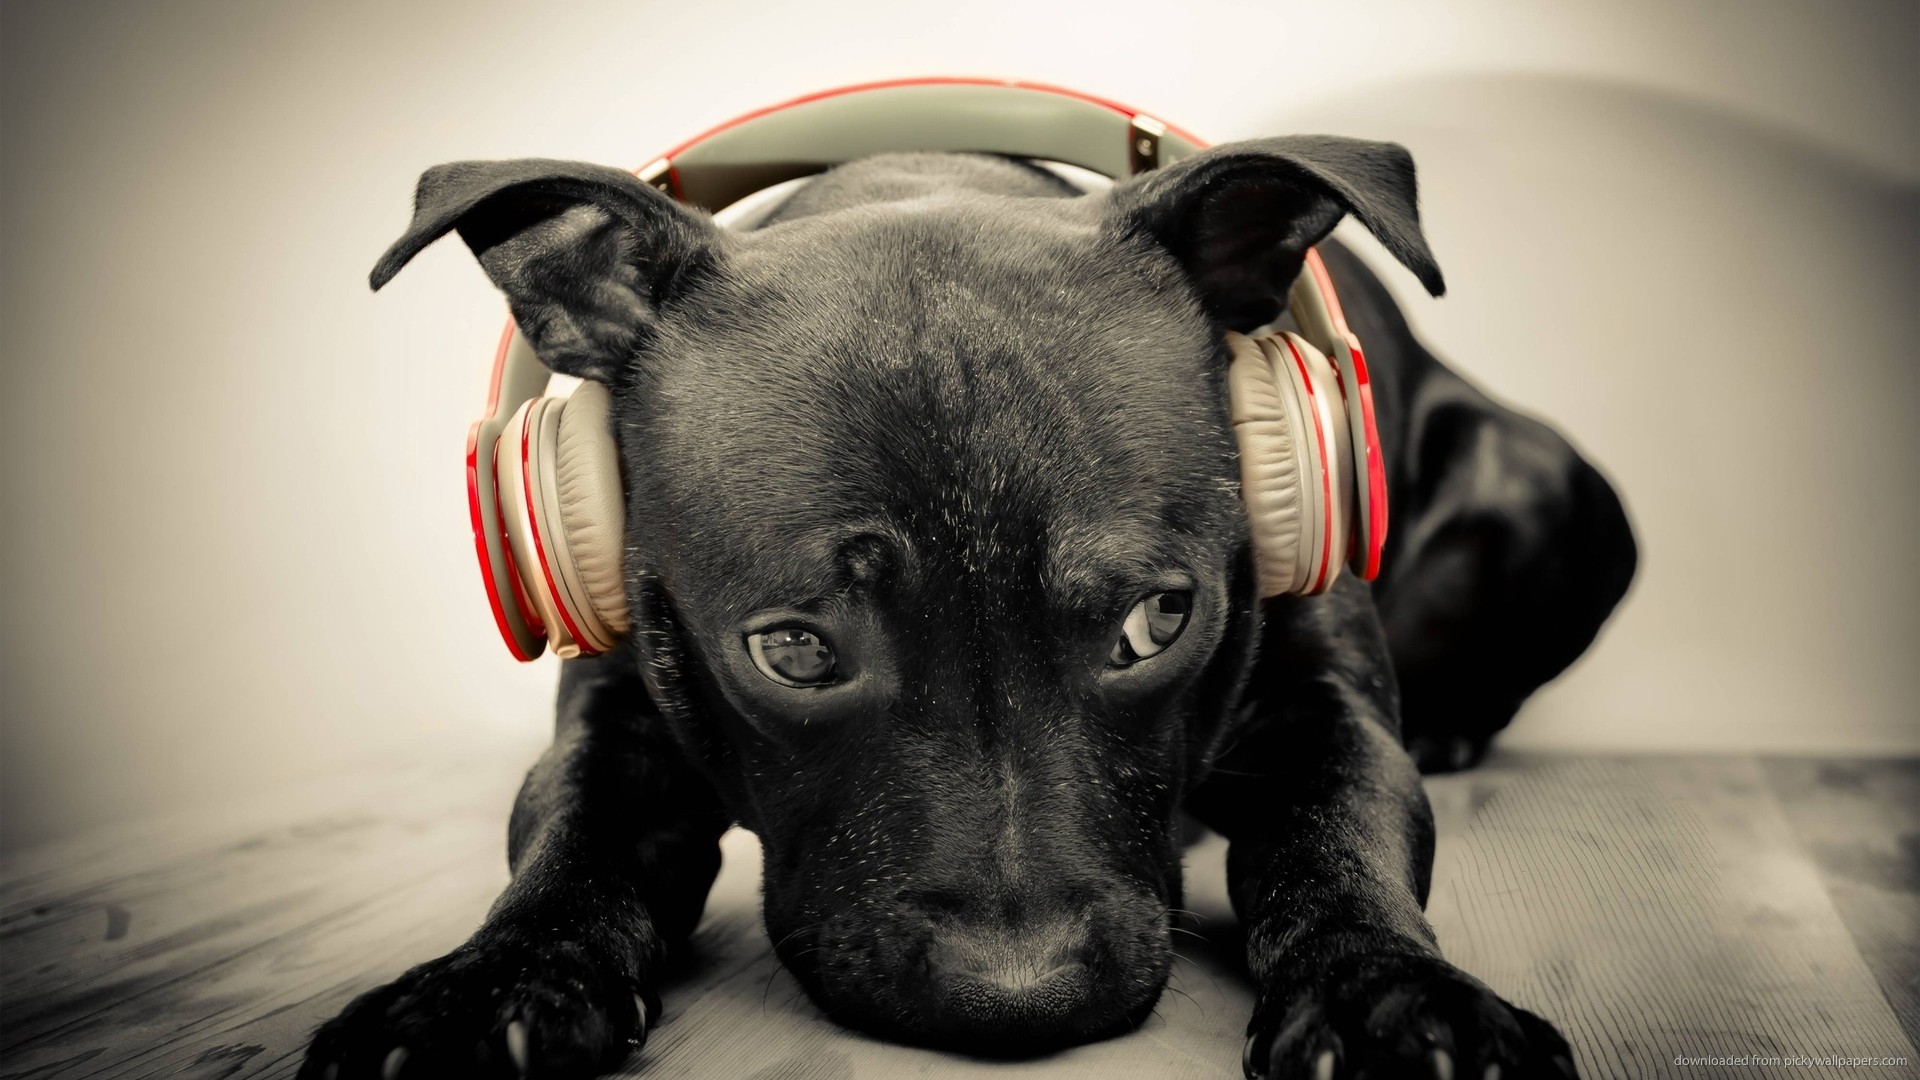 Dog Listening To Red Beats By Dre Solo HD Wallpaper